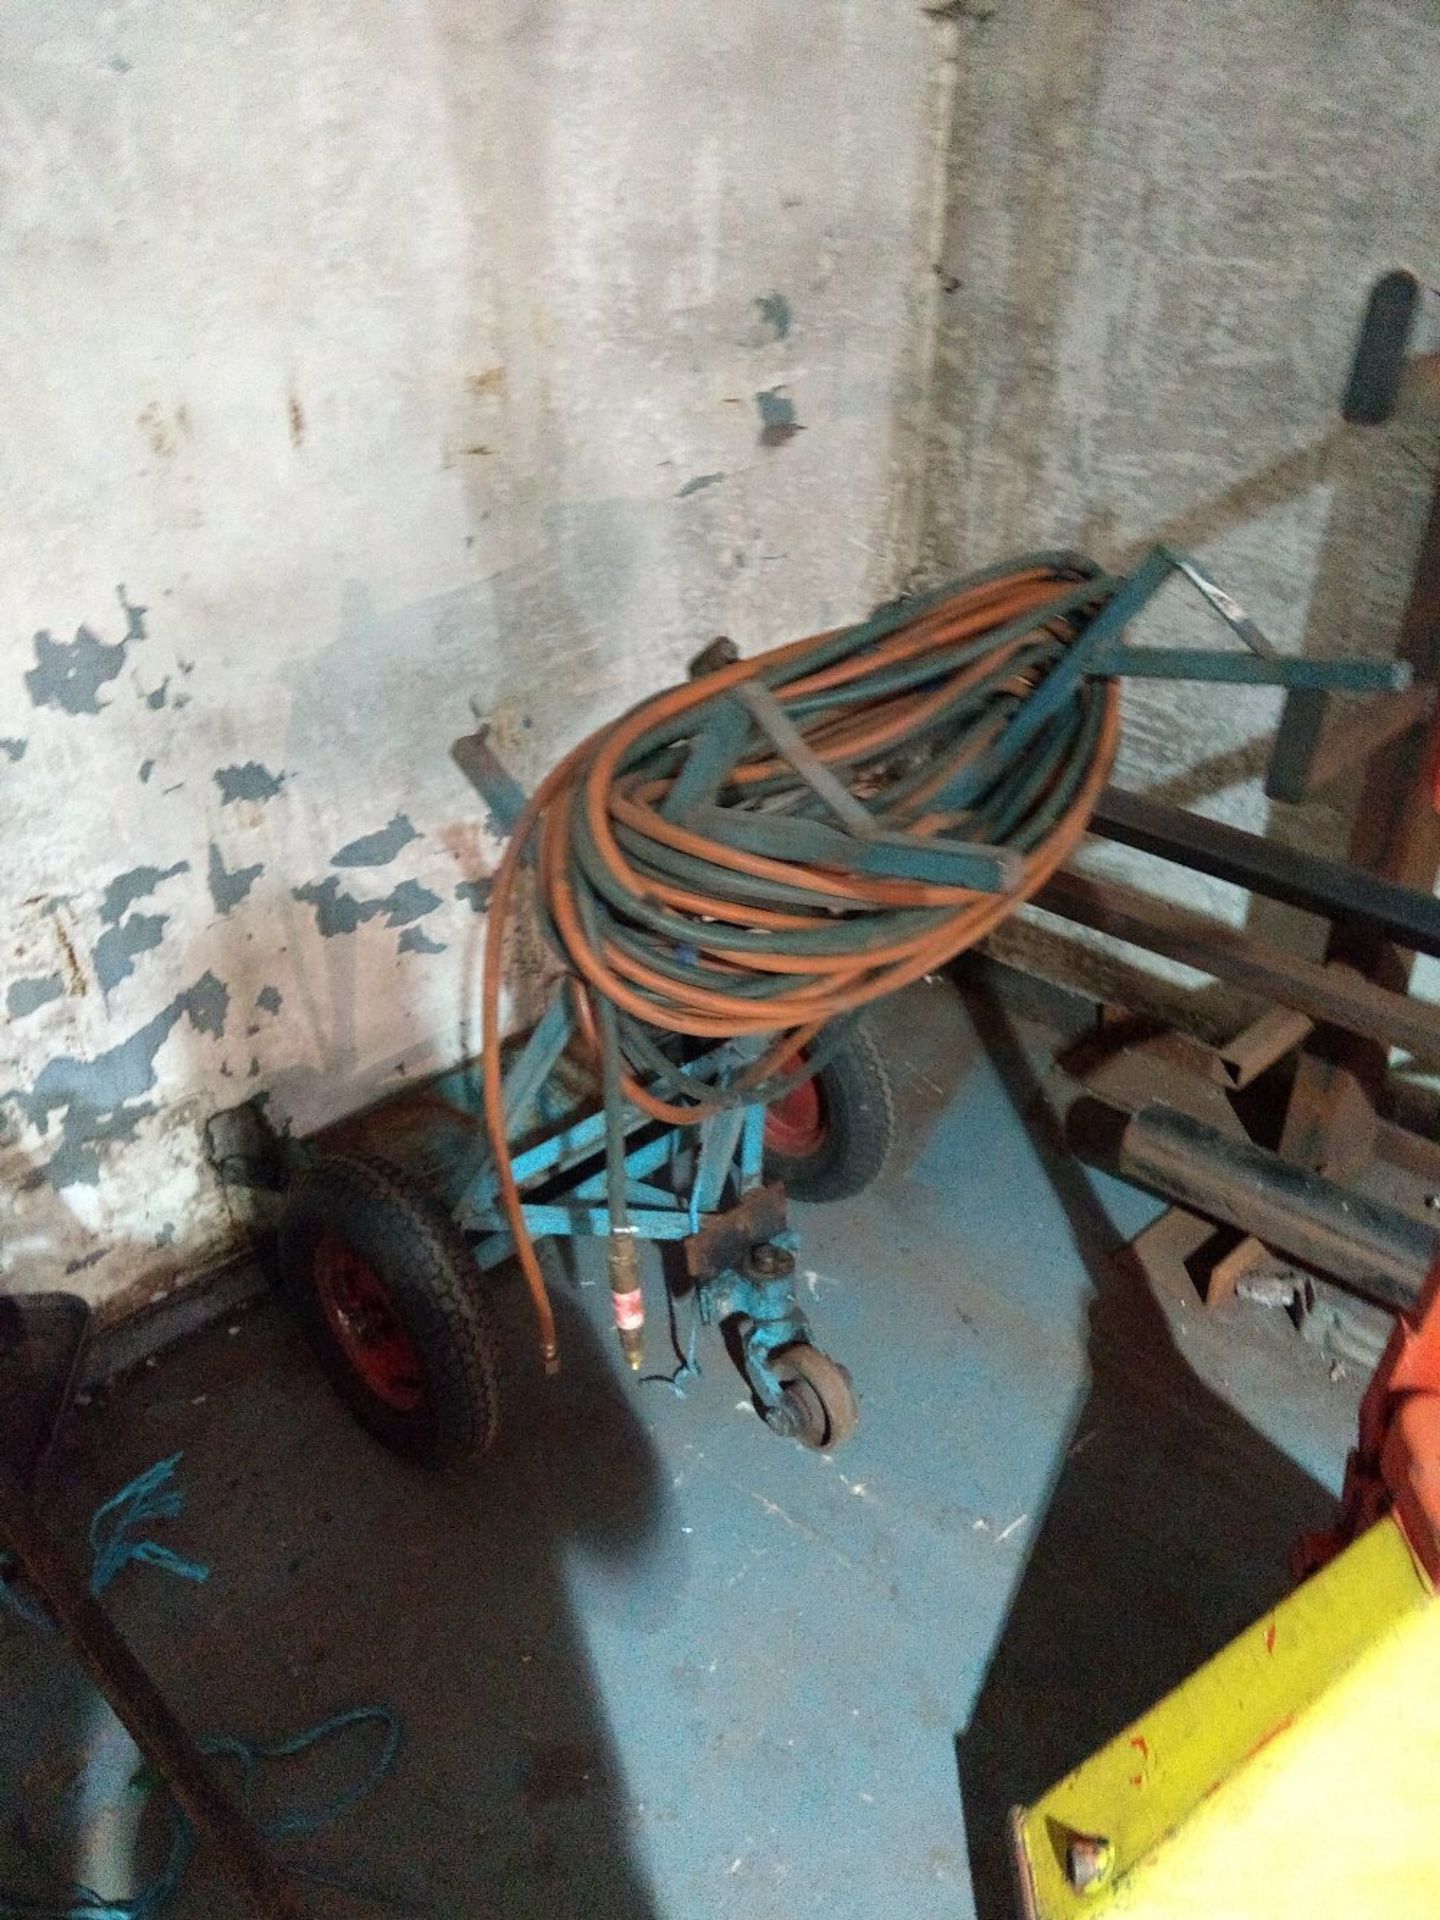 Set of burning pipes and bottle trolley. No VAT on this item. - Image 2 of 2